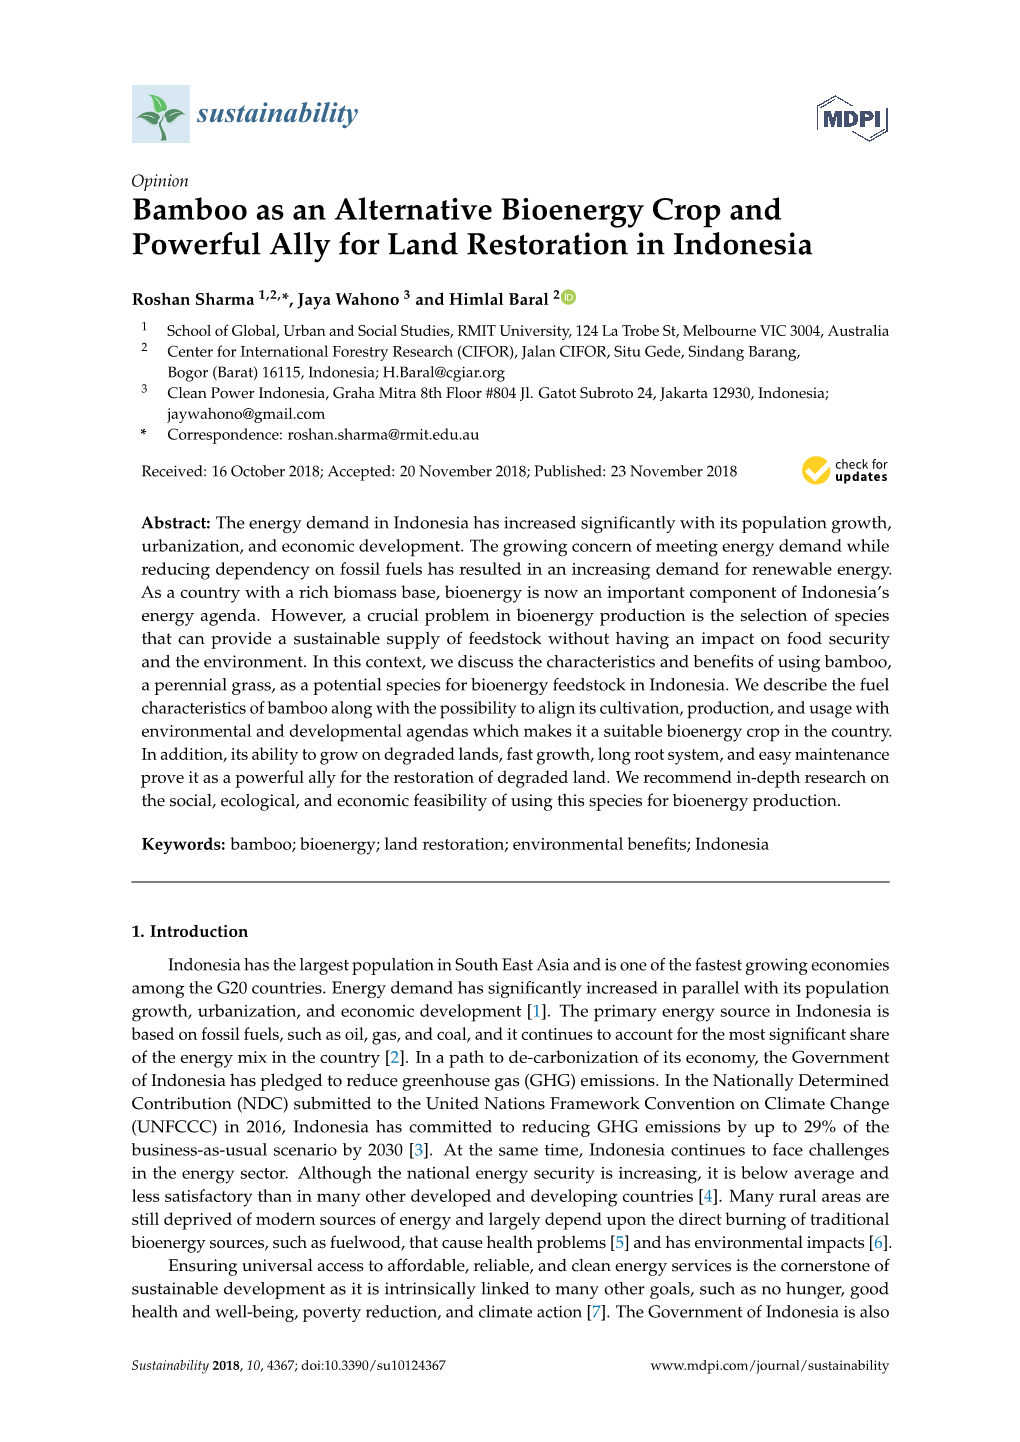 Bamboo As an Alternative Bioenergy Crop and Powerful Ally for Land Restoration in Indonesia